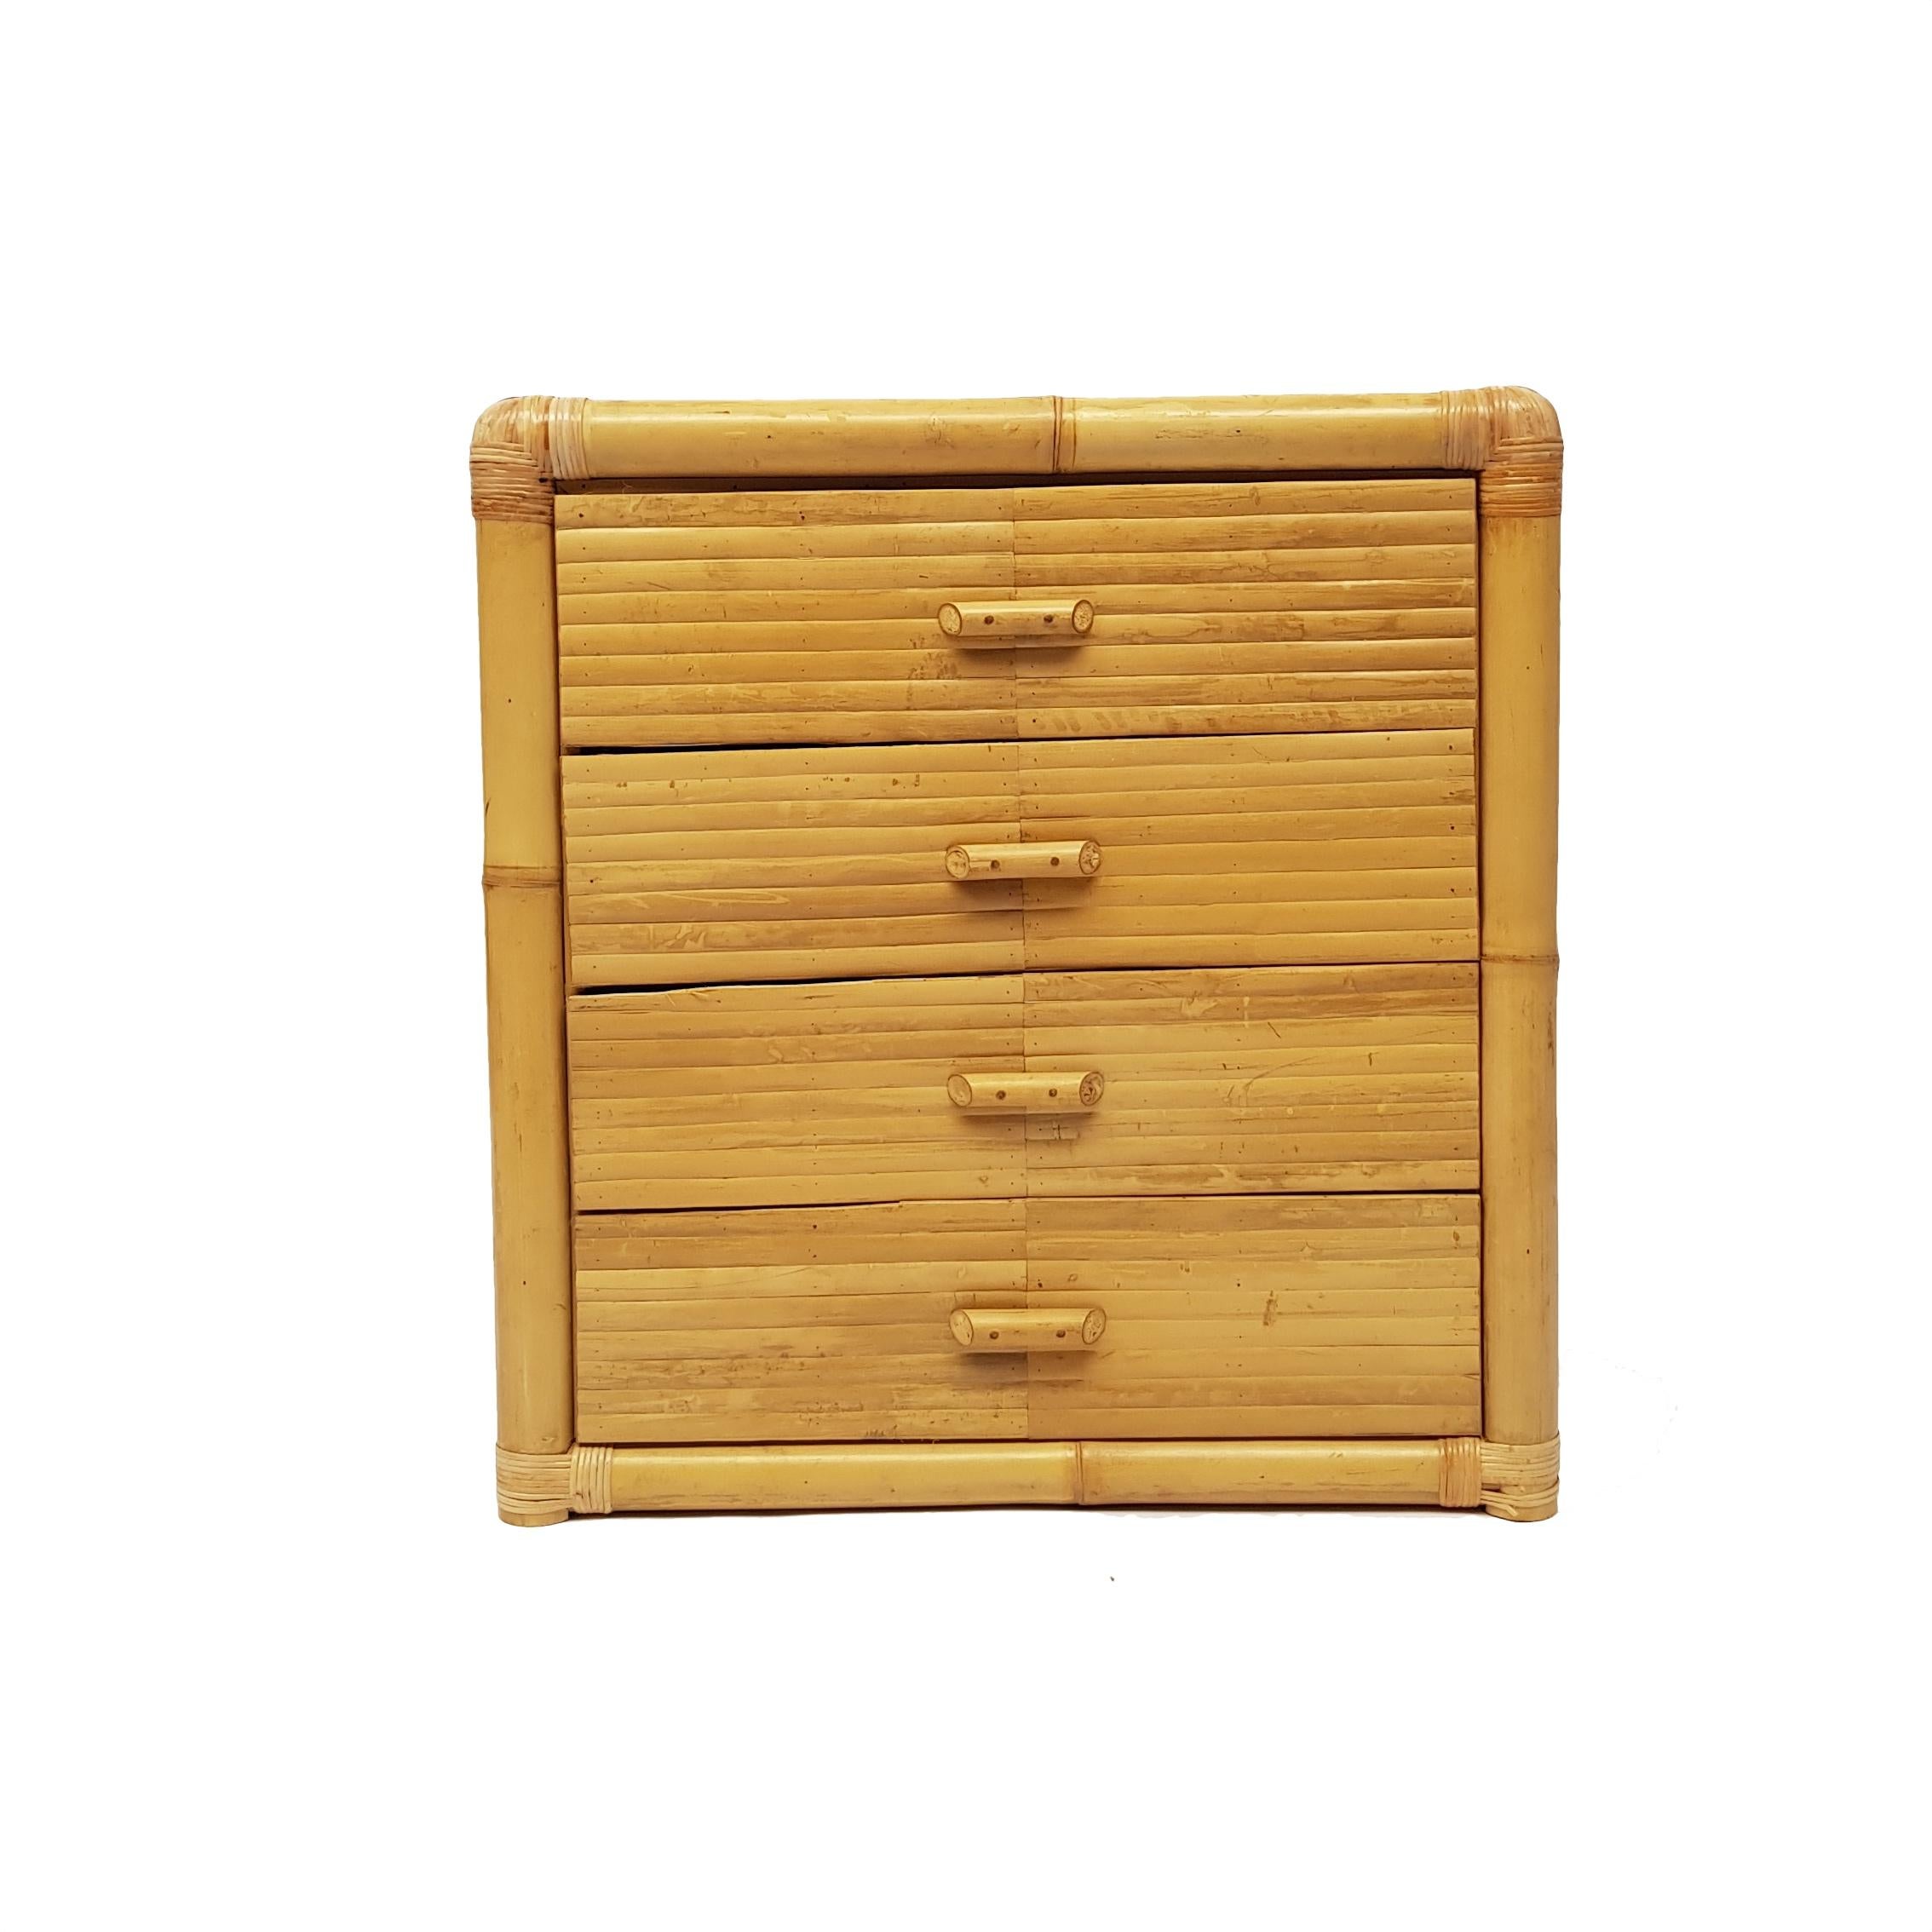 Great chest of drawers from a series of beautiful southern European bamboo furniture.